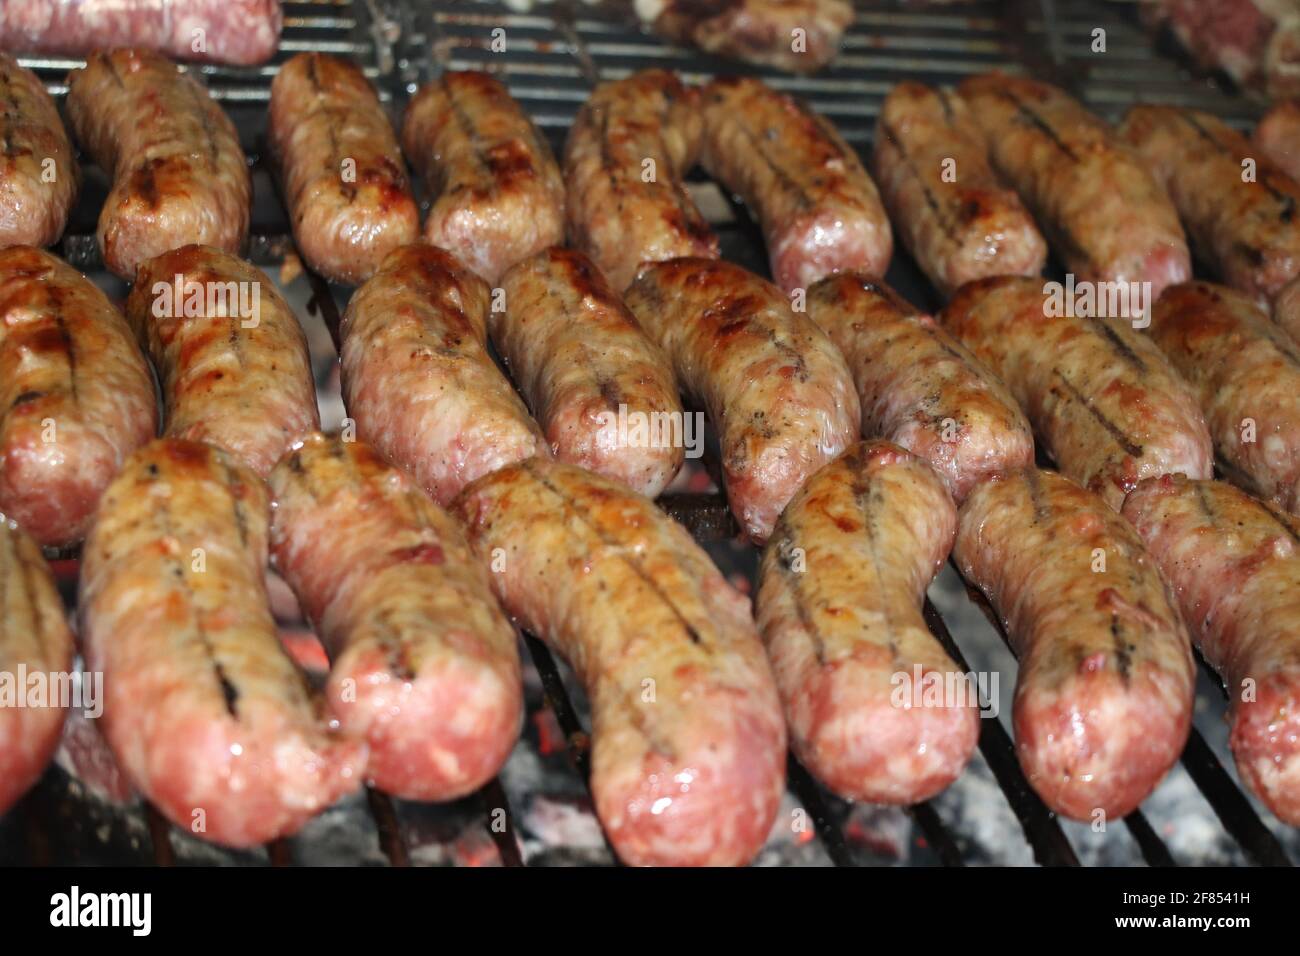 Mixed meat with ribs of beef and sausage on the grill Stock Photo